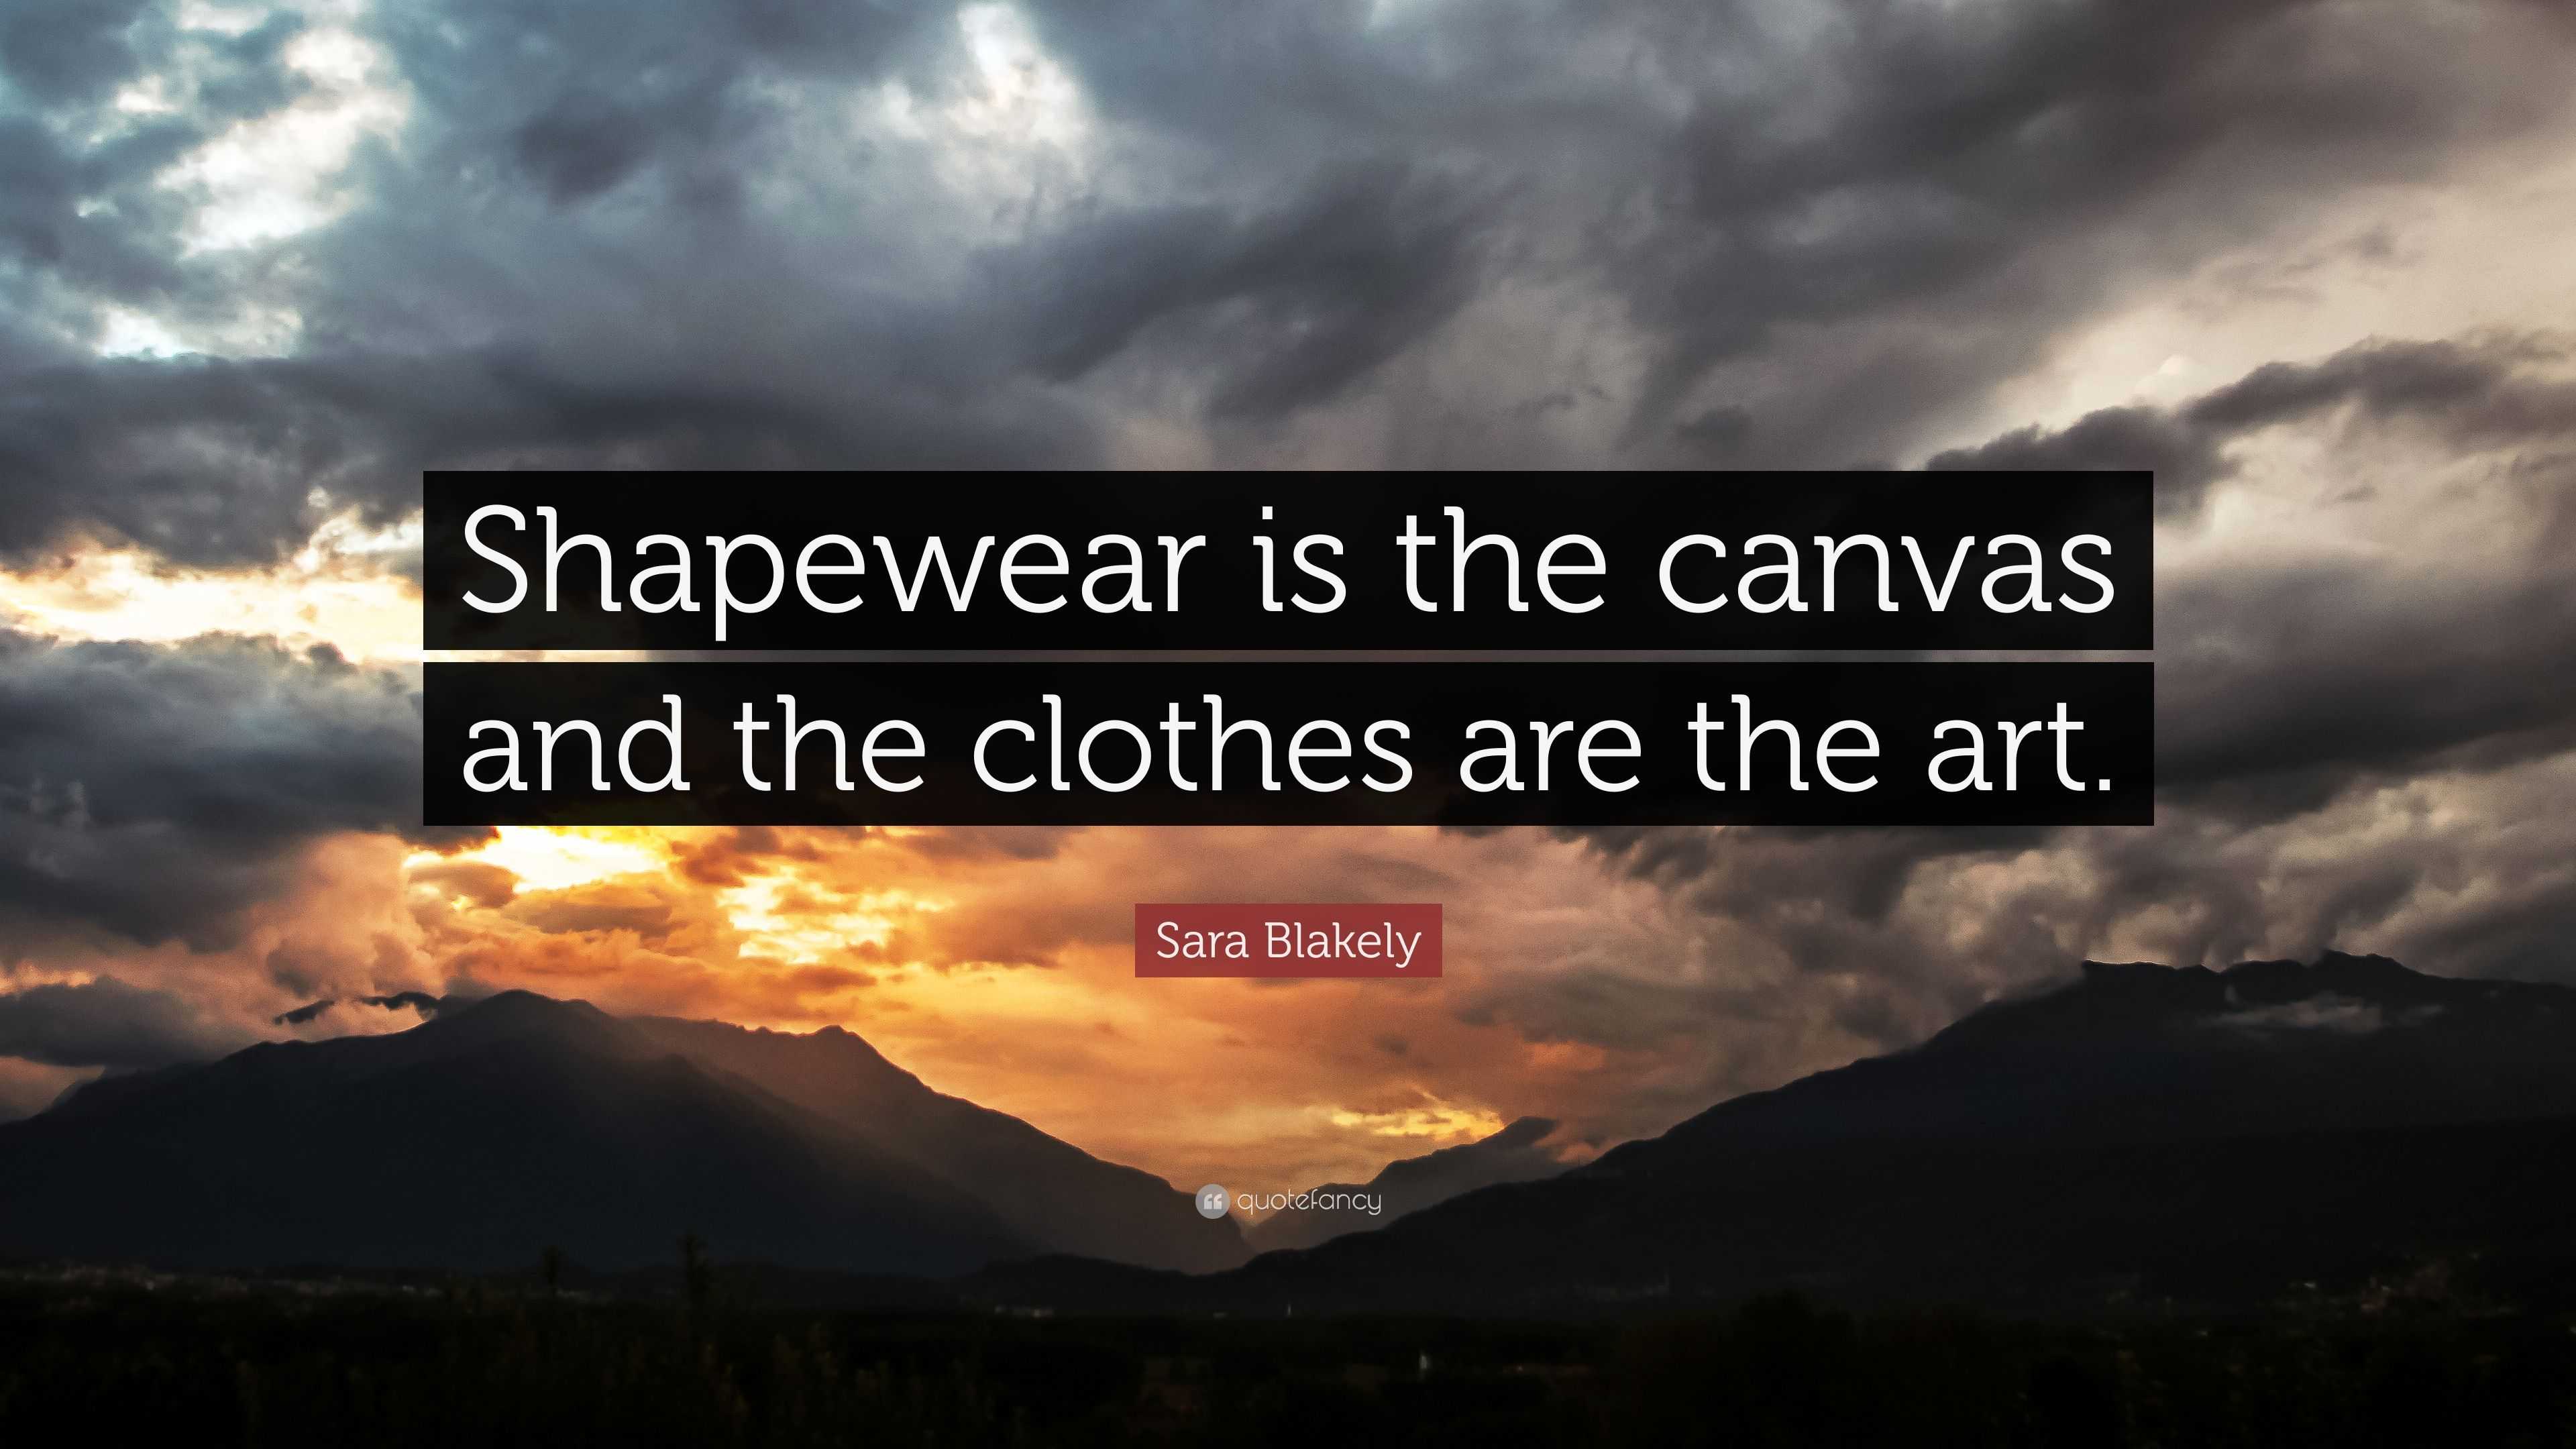 Sara Blakely Quote: “Shapewear is the canvas and the clothes are the art.”